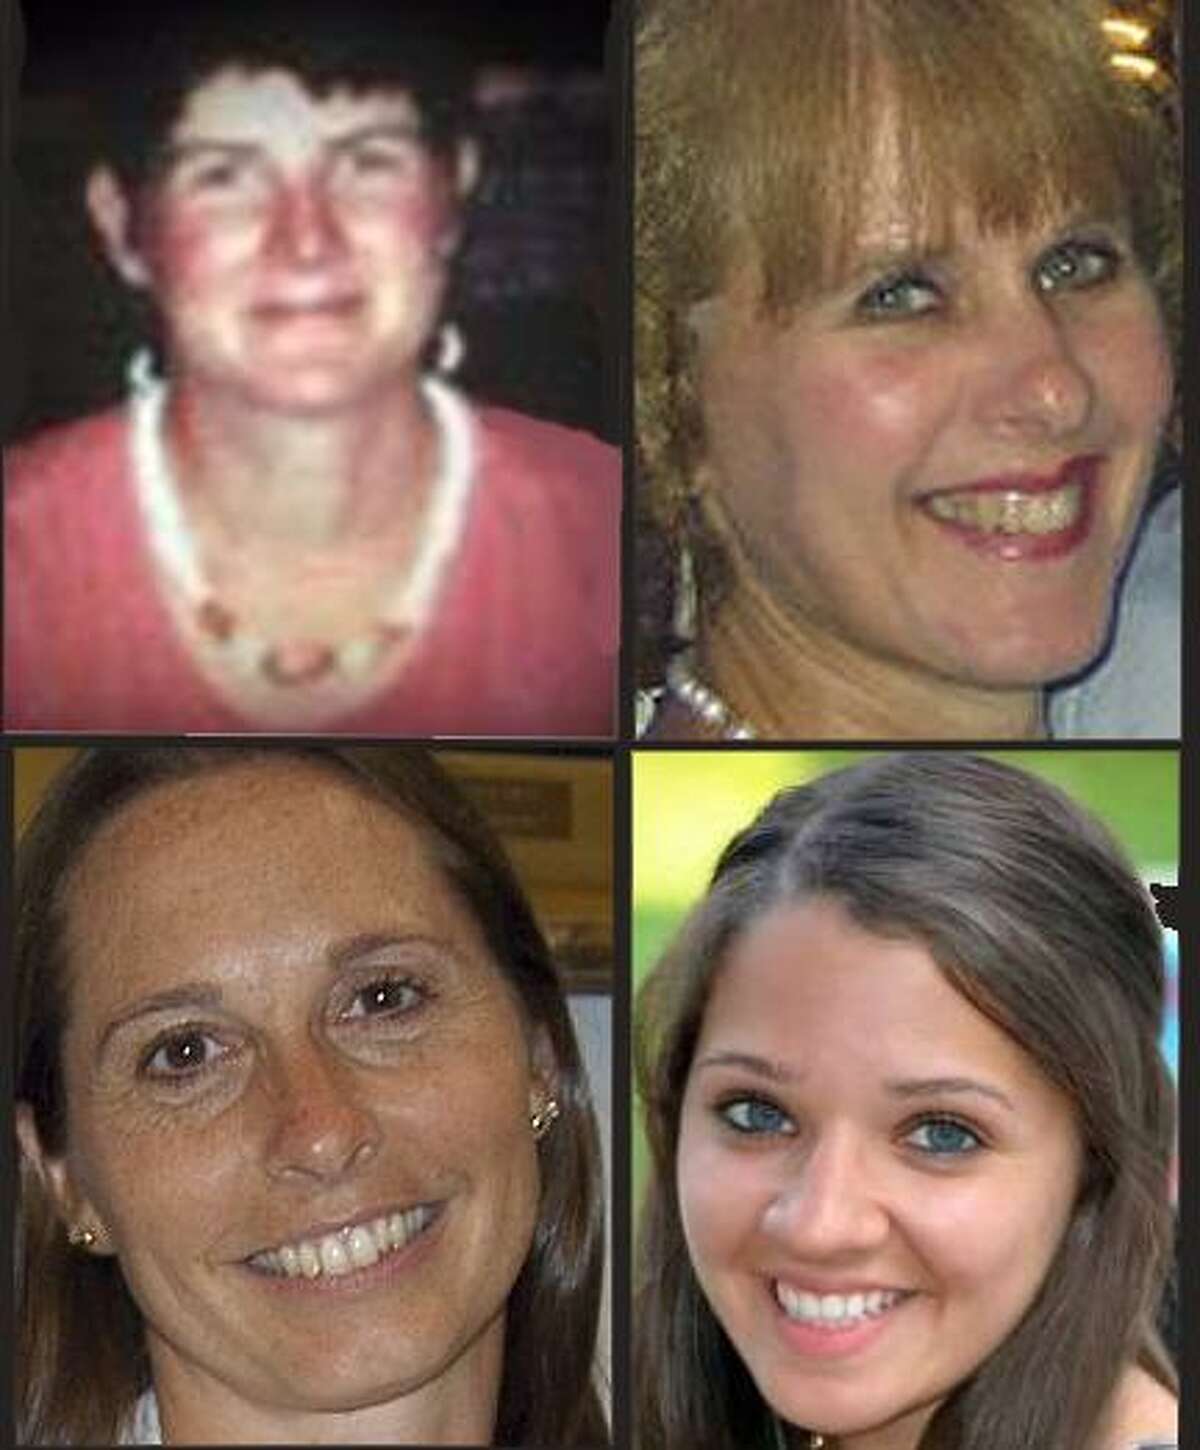 From top left, Anne Marie Murphy, Mary Sherlach, Dawn Lafferty Hochsprung and Victoria Soto.